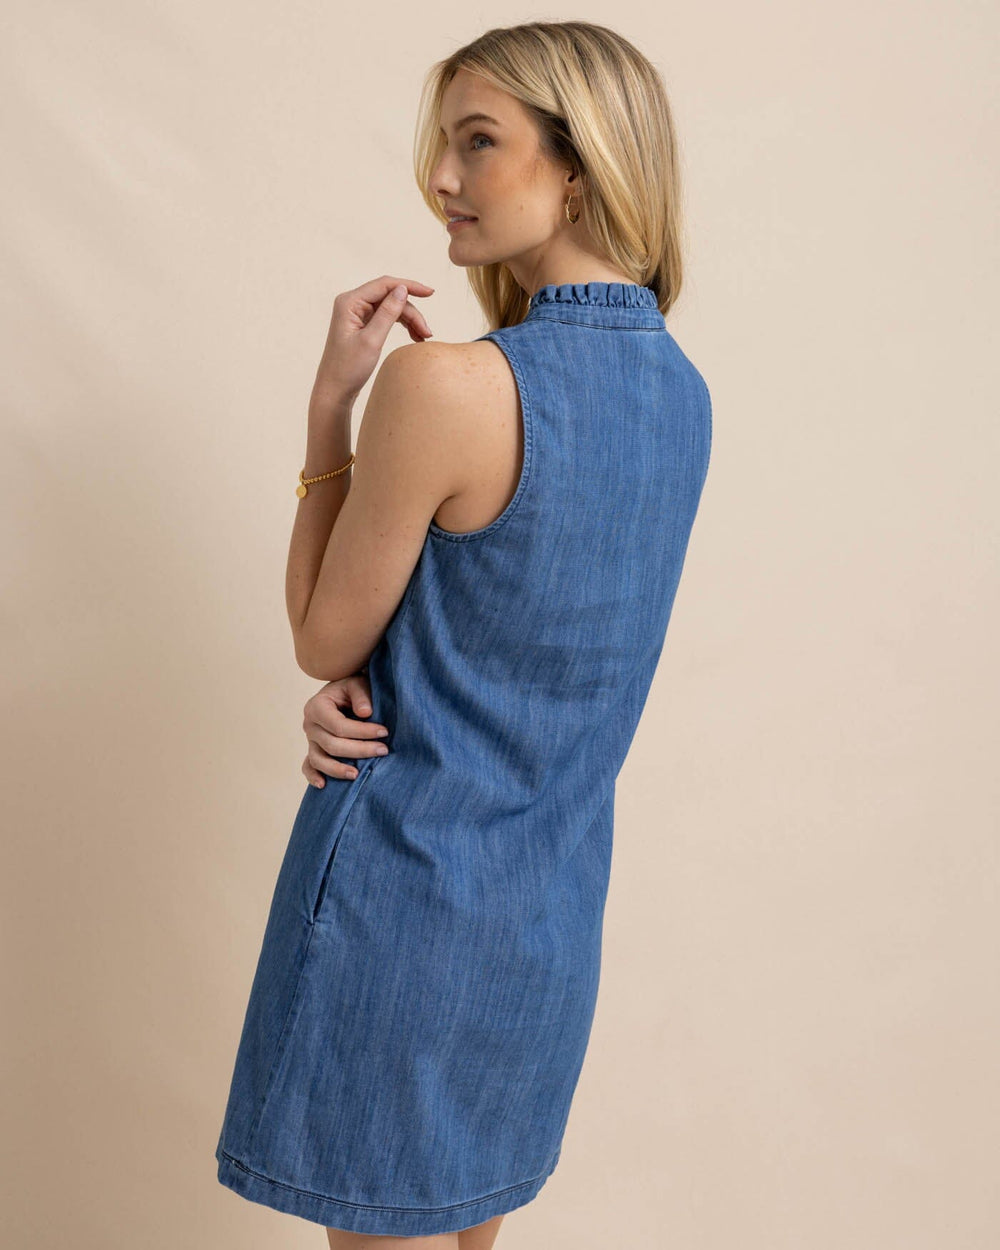 The back view of the Southern Tide Adelyn Denim Dress by Southern Tide - Medium Wash Indigo